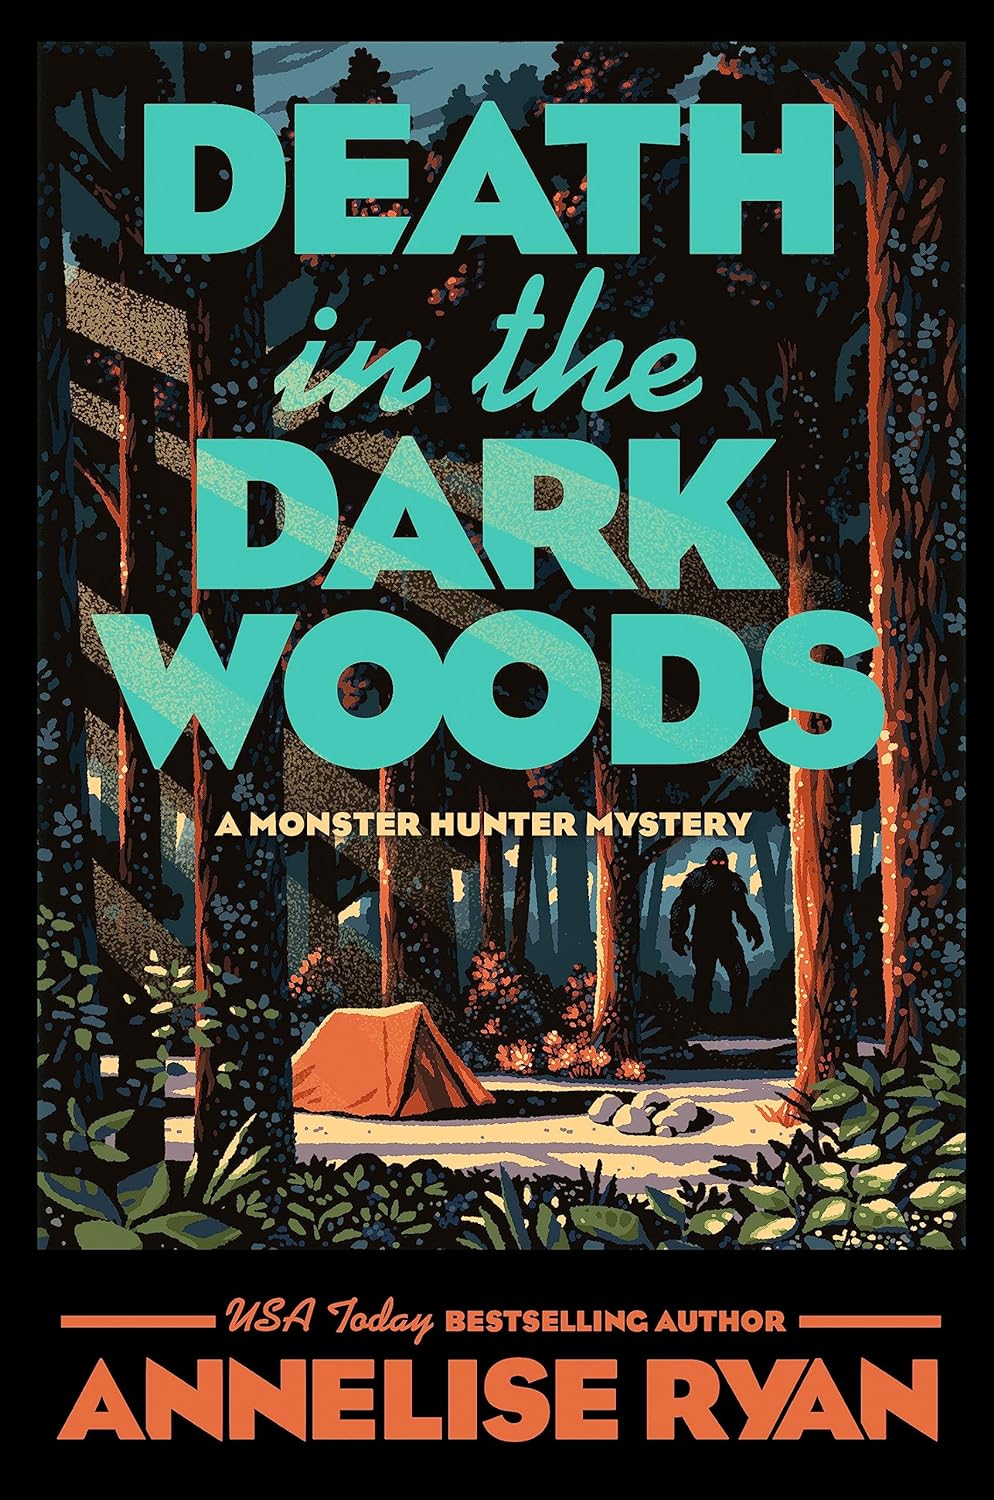 Image for "Death in the Dark Woods"